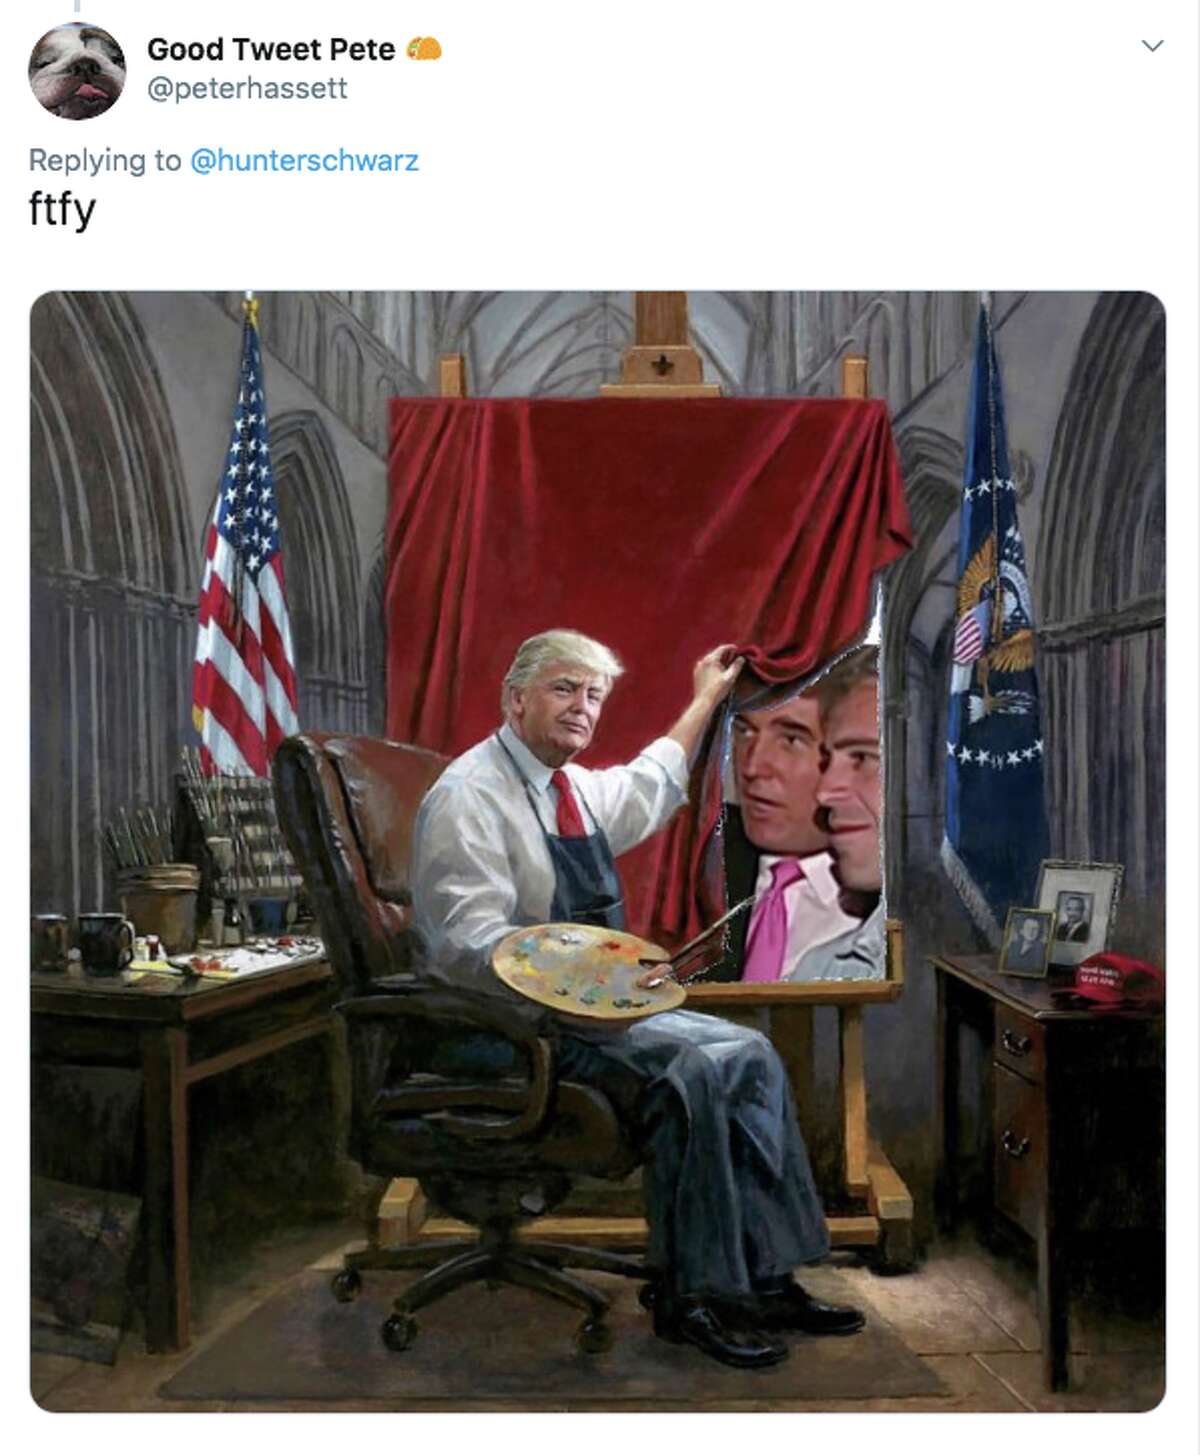 The Internet Had A Field Day With Artist S Pro Trump Painting